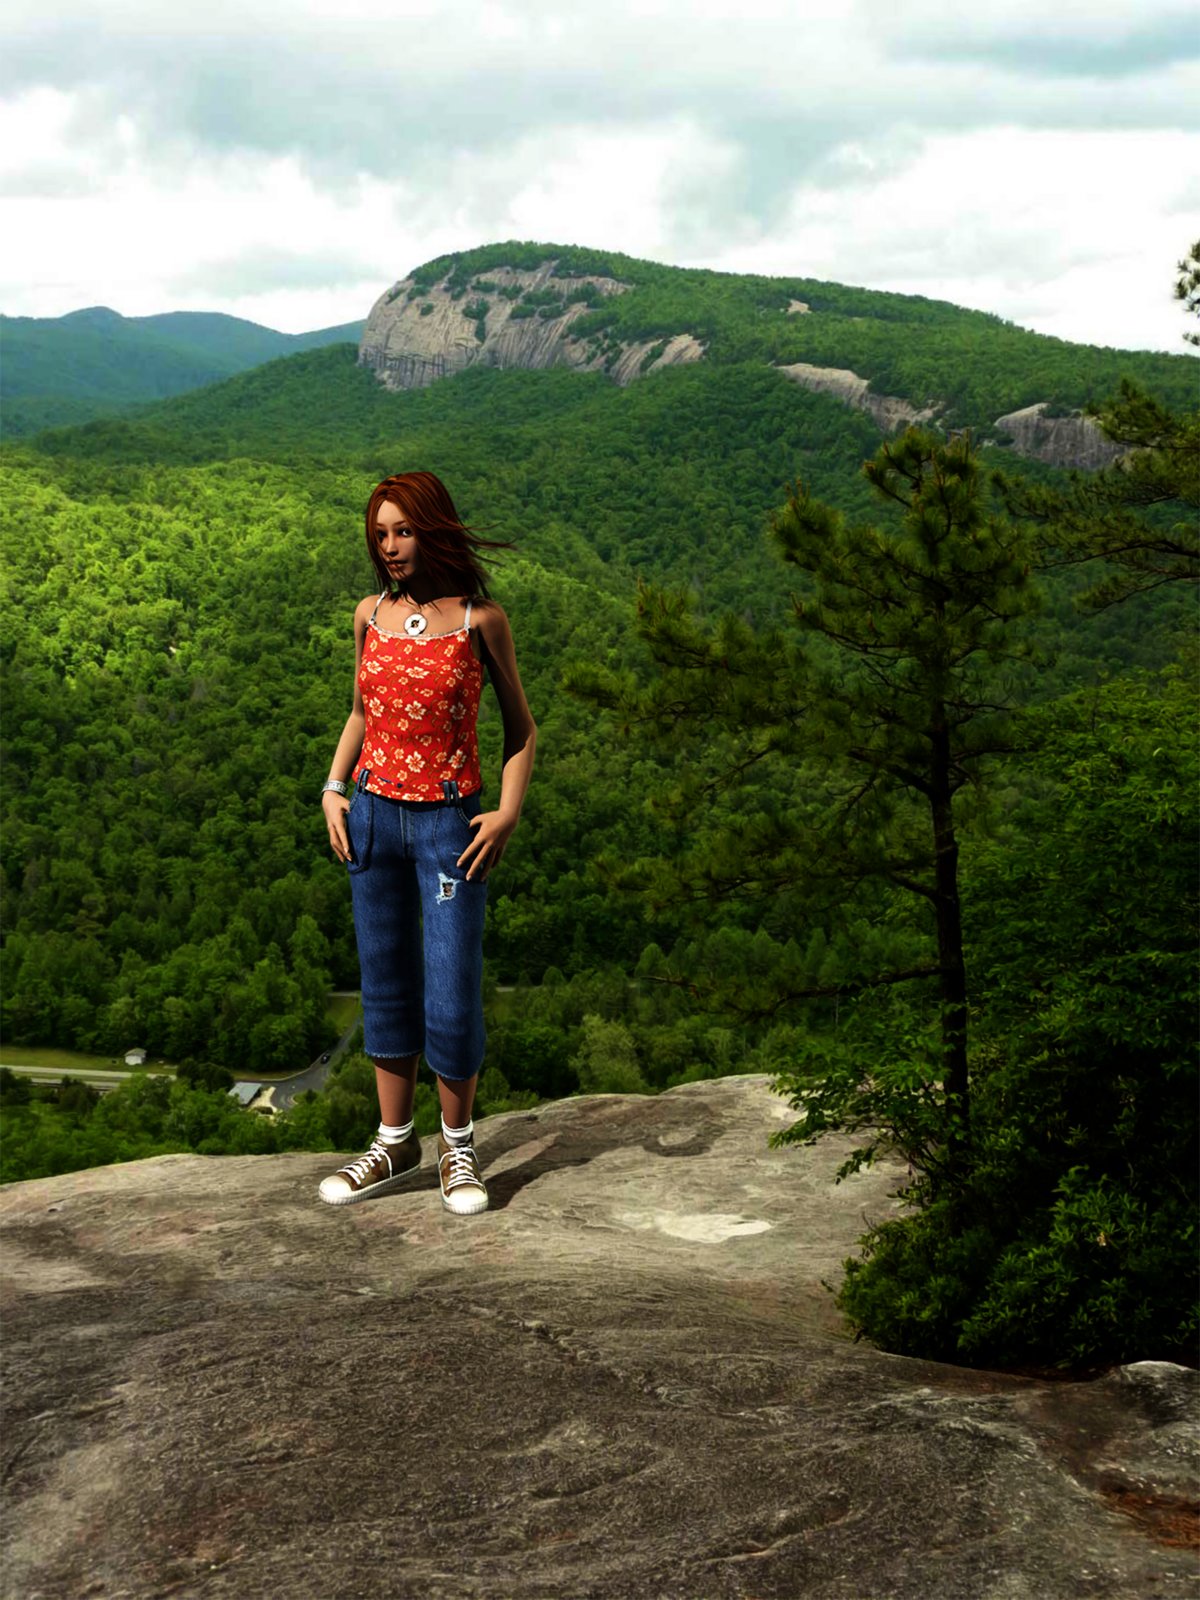 Ashley - At Looking Glass Rock